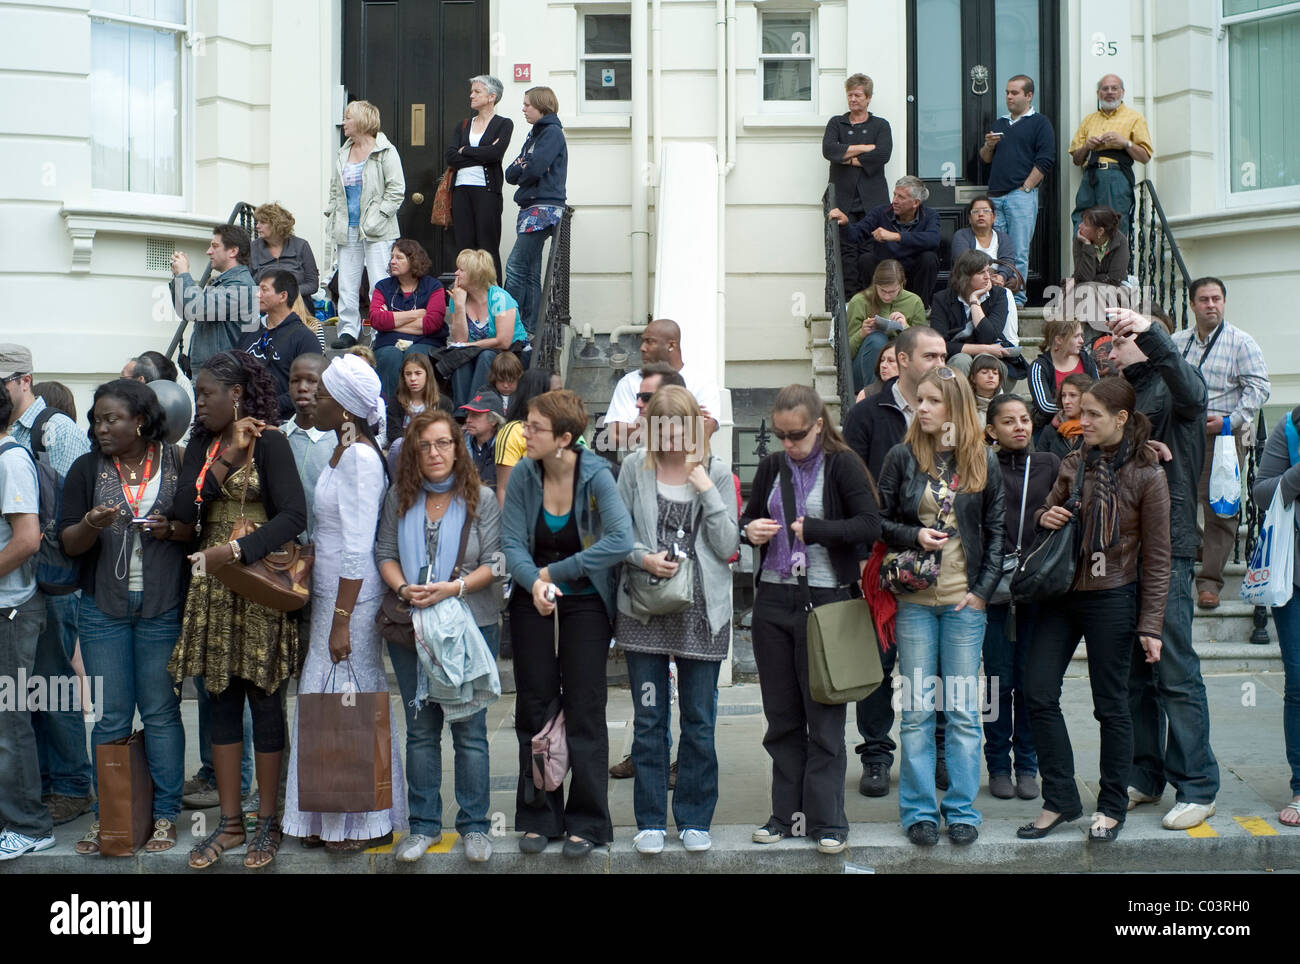 A photograph of a crowd of on-lookers at the Notting Hill Carnival, London 2010 Stock Photo